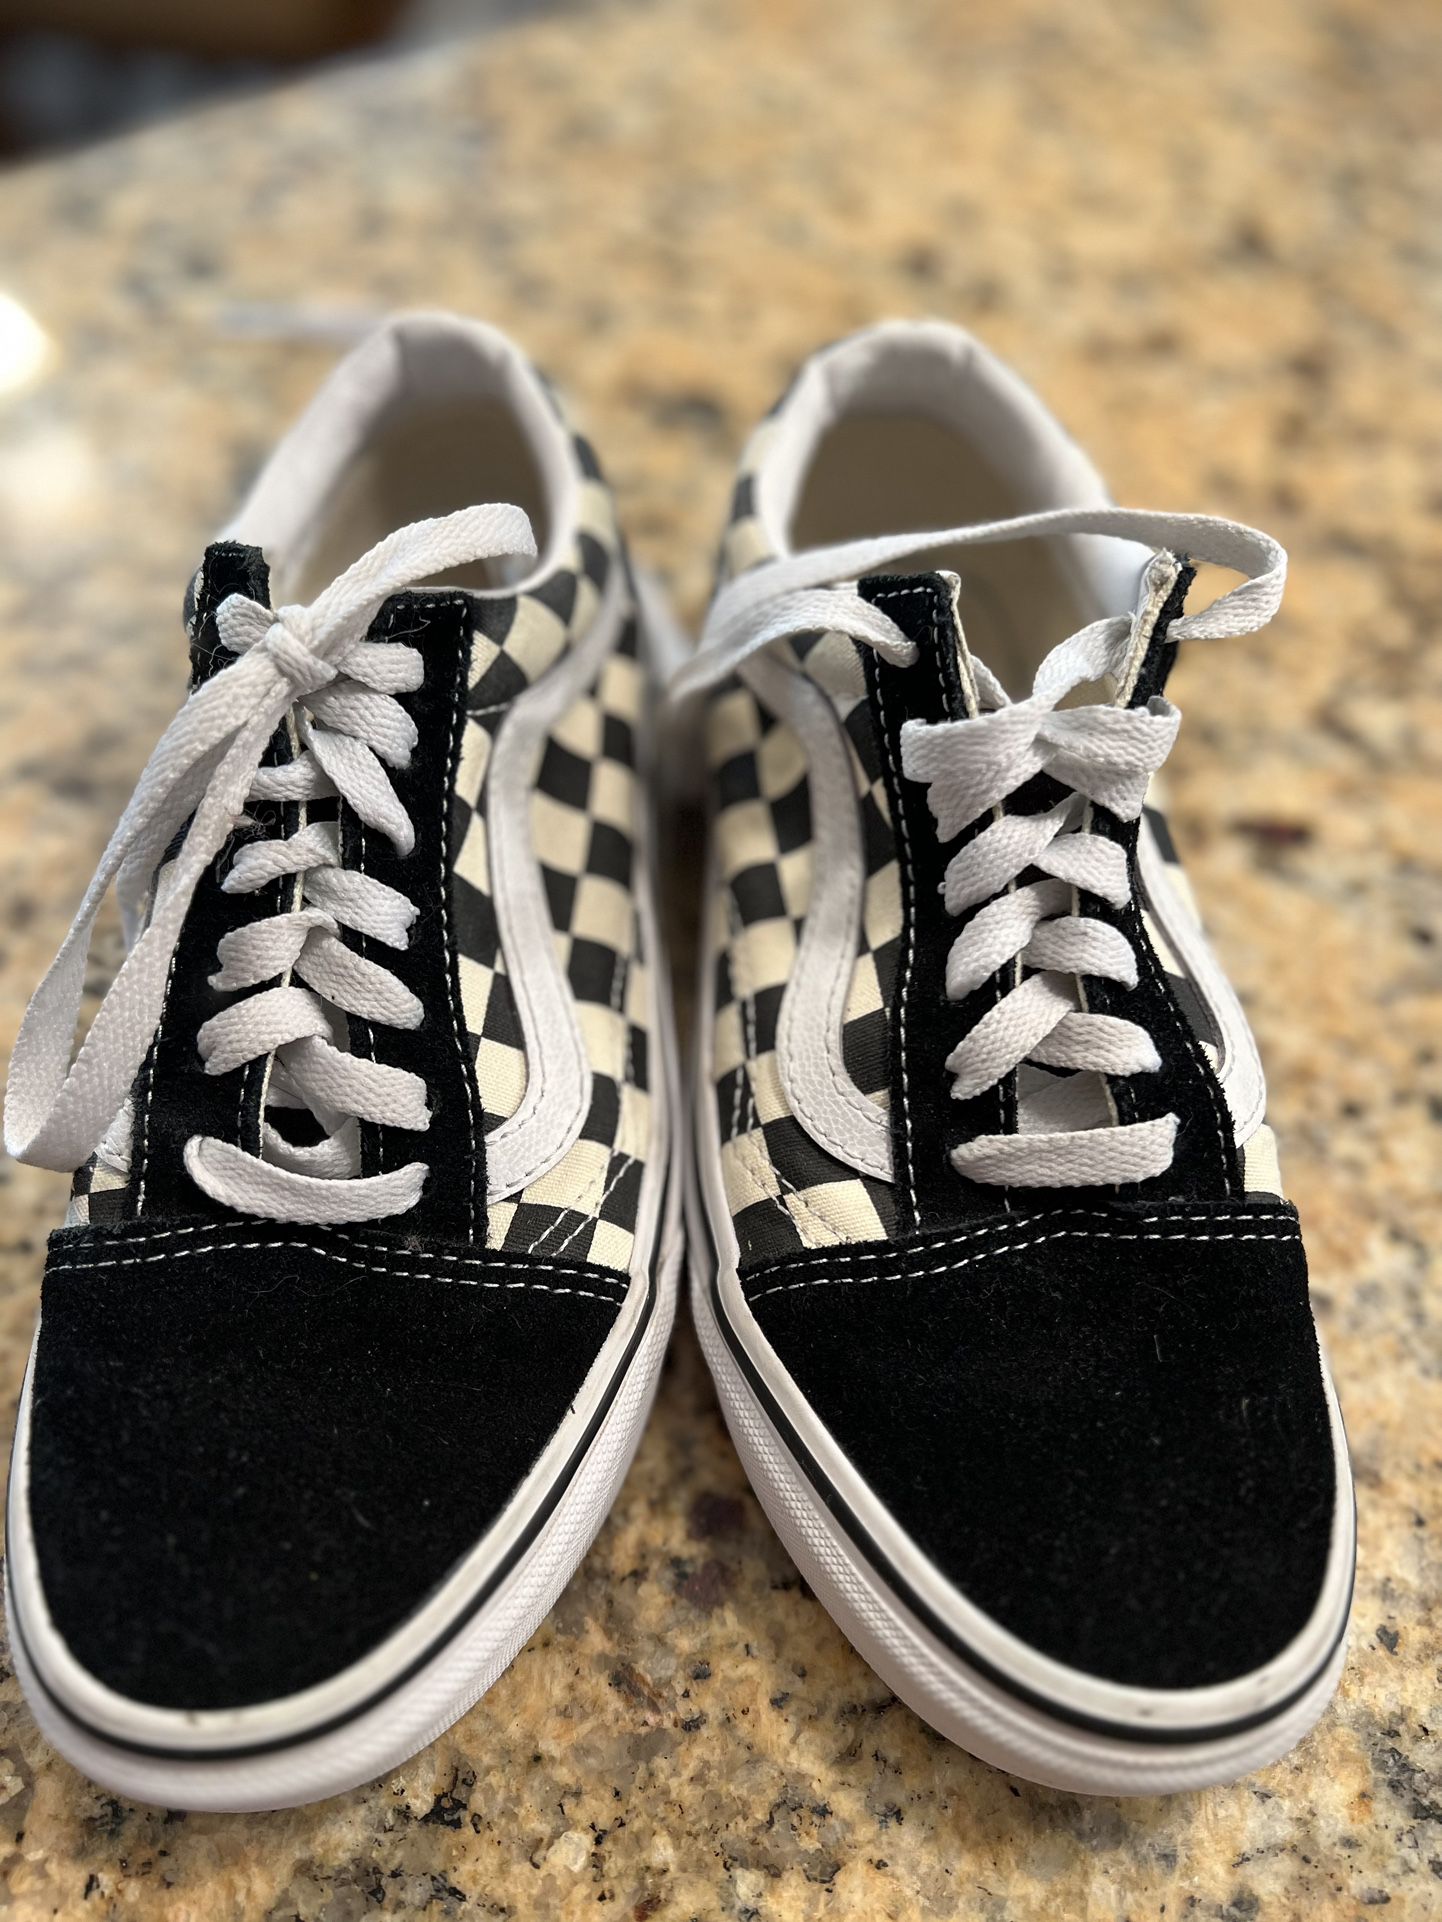 Checkered Vans For Sale